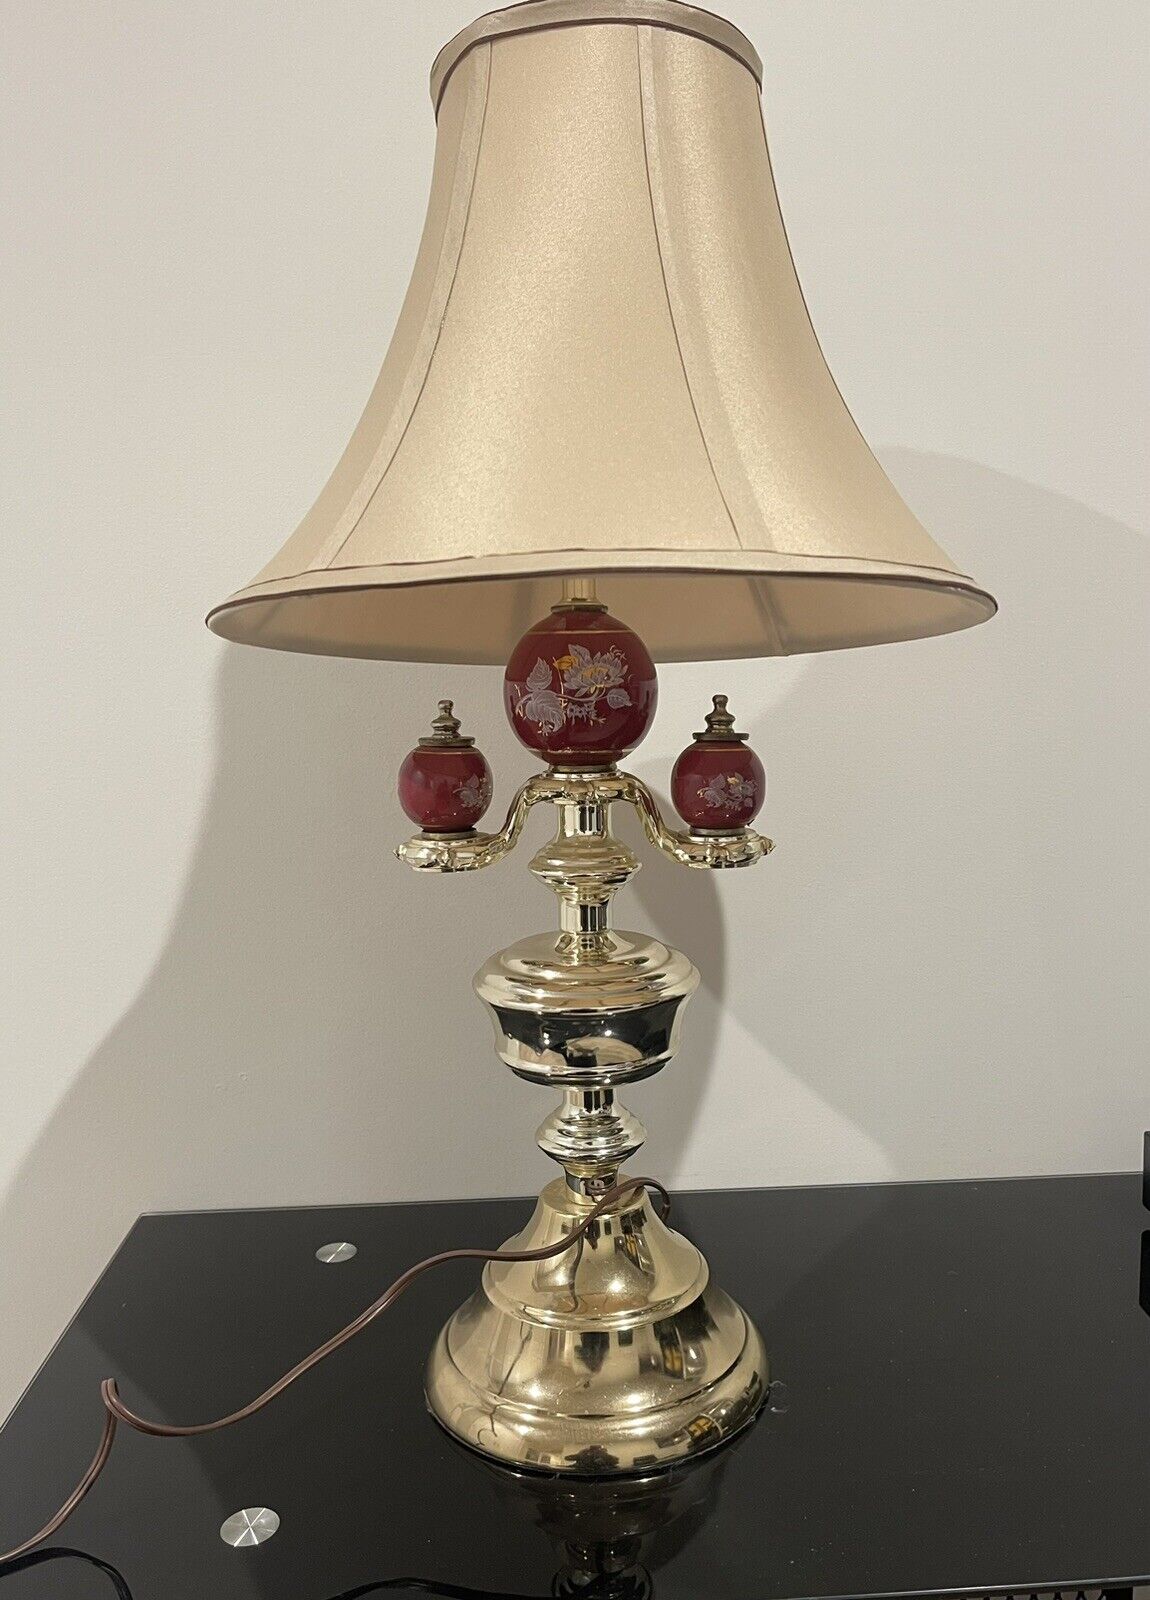 Vintage Heavy Polished Brass Table Lamps Mid-Century Modern